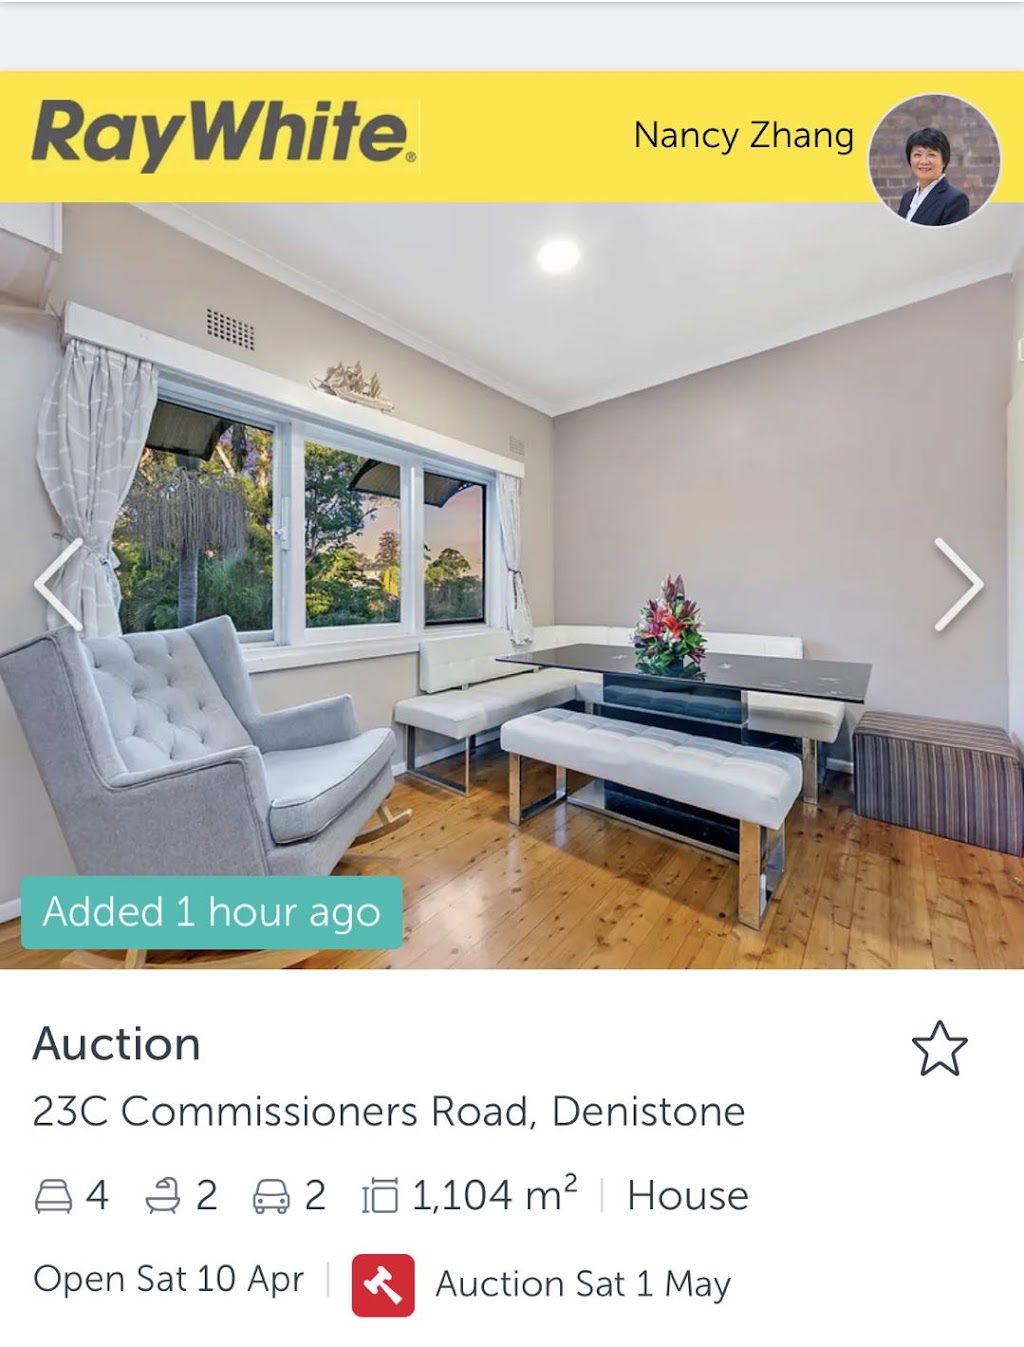 Excellent real estate agent Nancy Zhang | Carlingford Rd, Carlingford NSW 2118, Australia | Phone: 0424 066 738